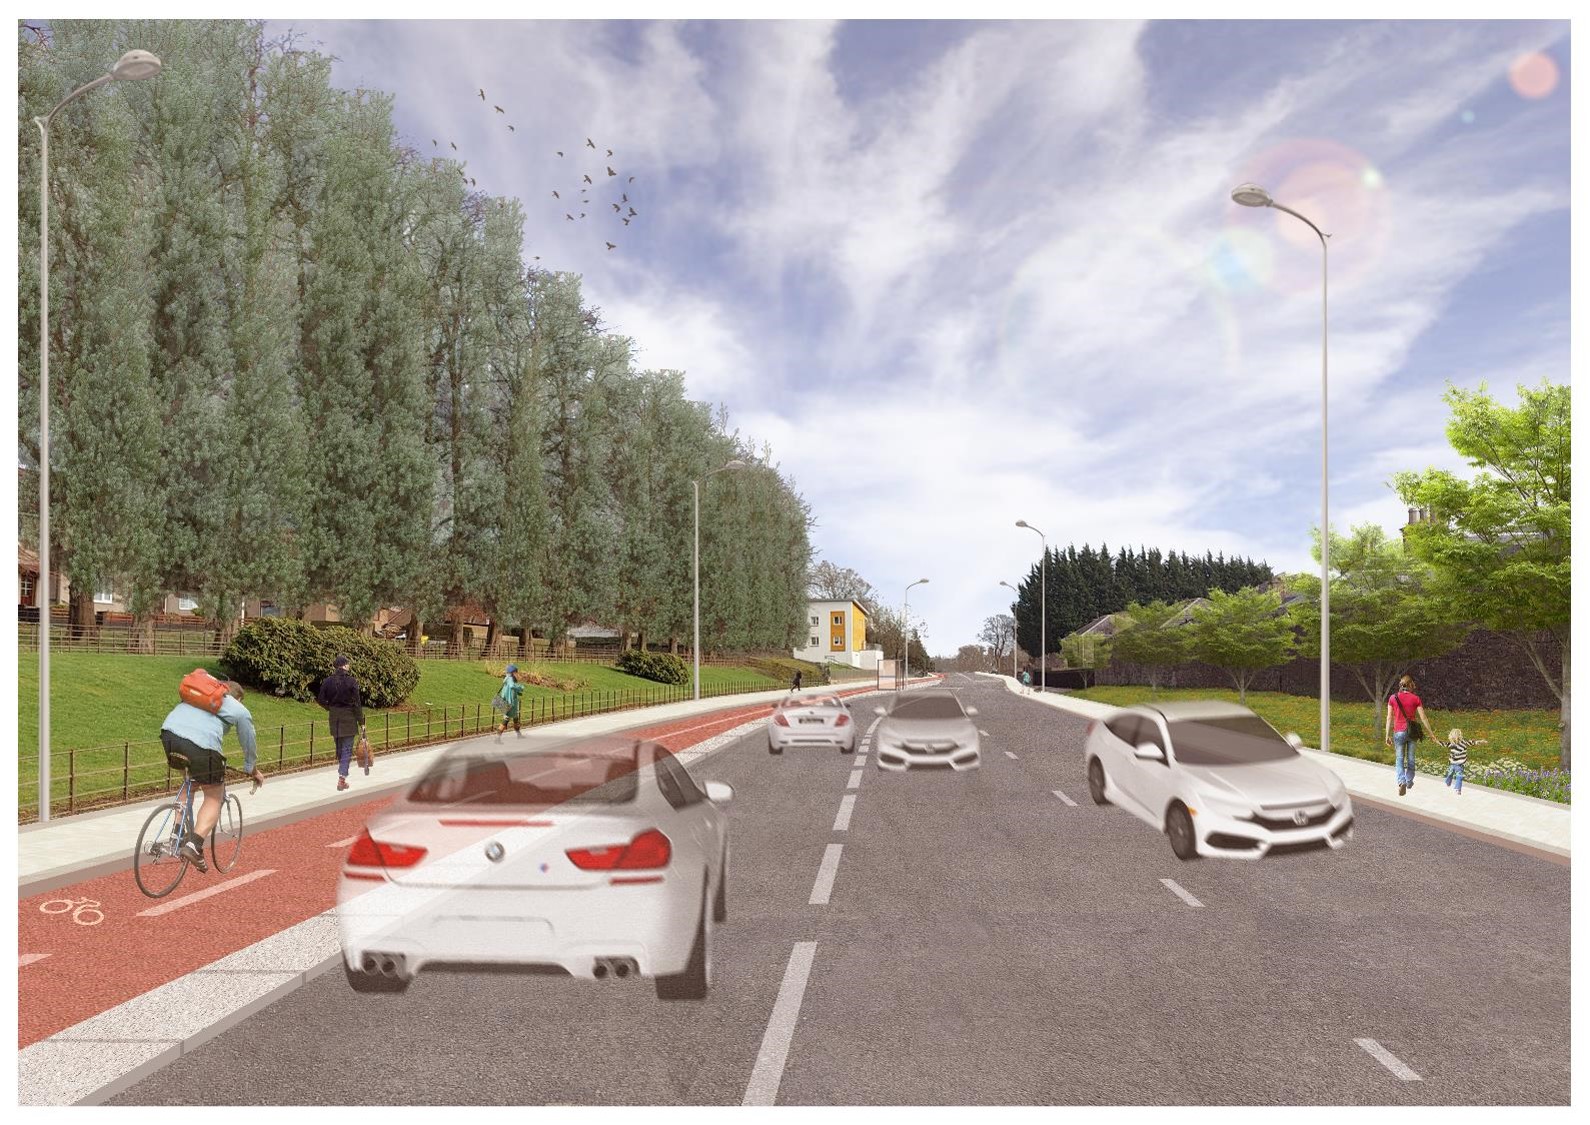 Active freeway concept designs subject of Dundee consultation